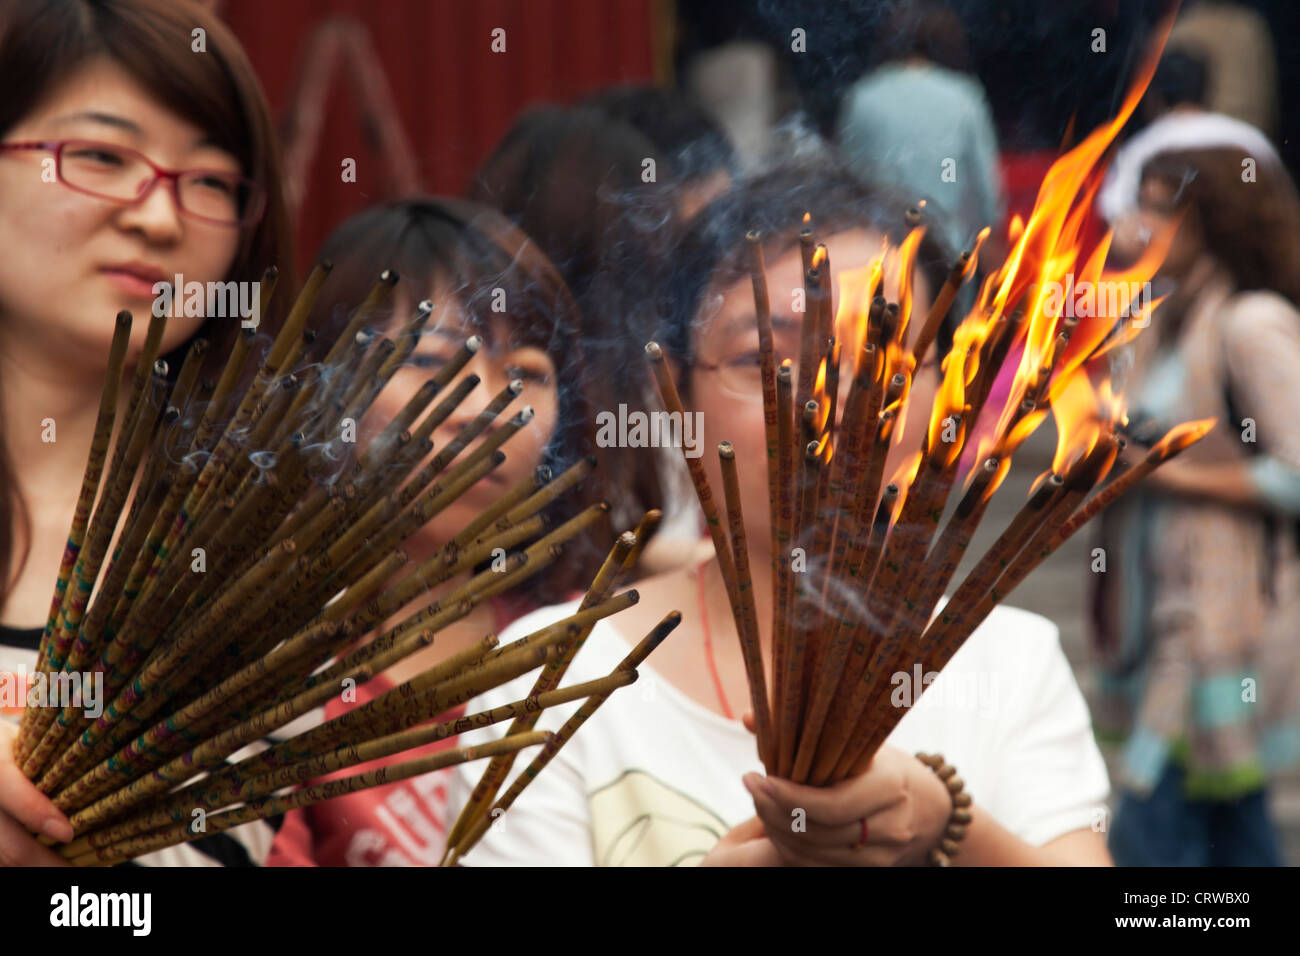 People light incense sticks in a fire at The Yonghe Temple, also known as the "Palace of Peace and Harmony Lama Temple", Beijing Stock Photo